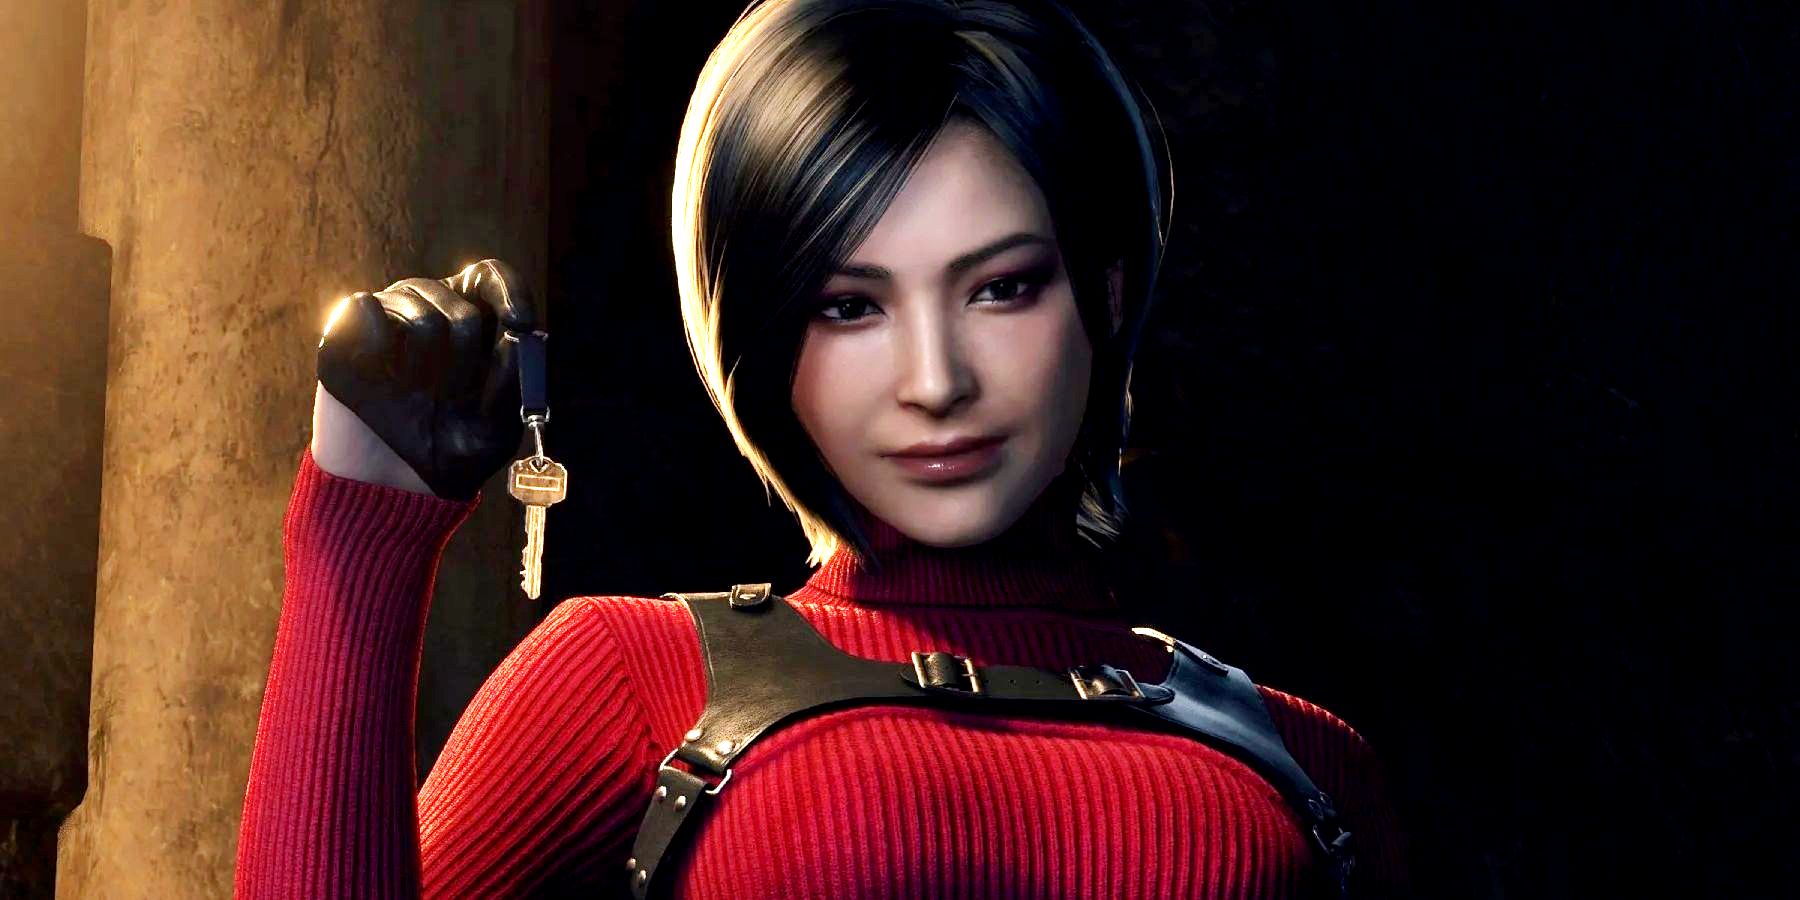 Resident Evil 4 Remake: Ada Wong Actress Bullied Off Instagram